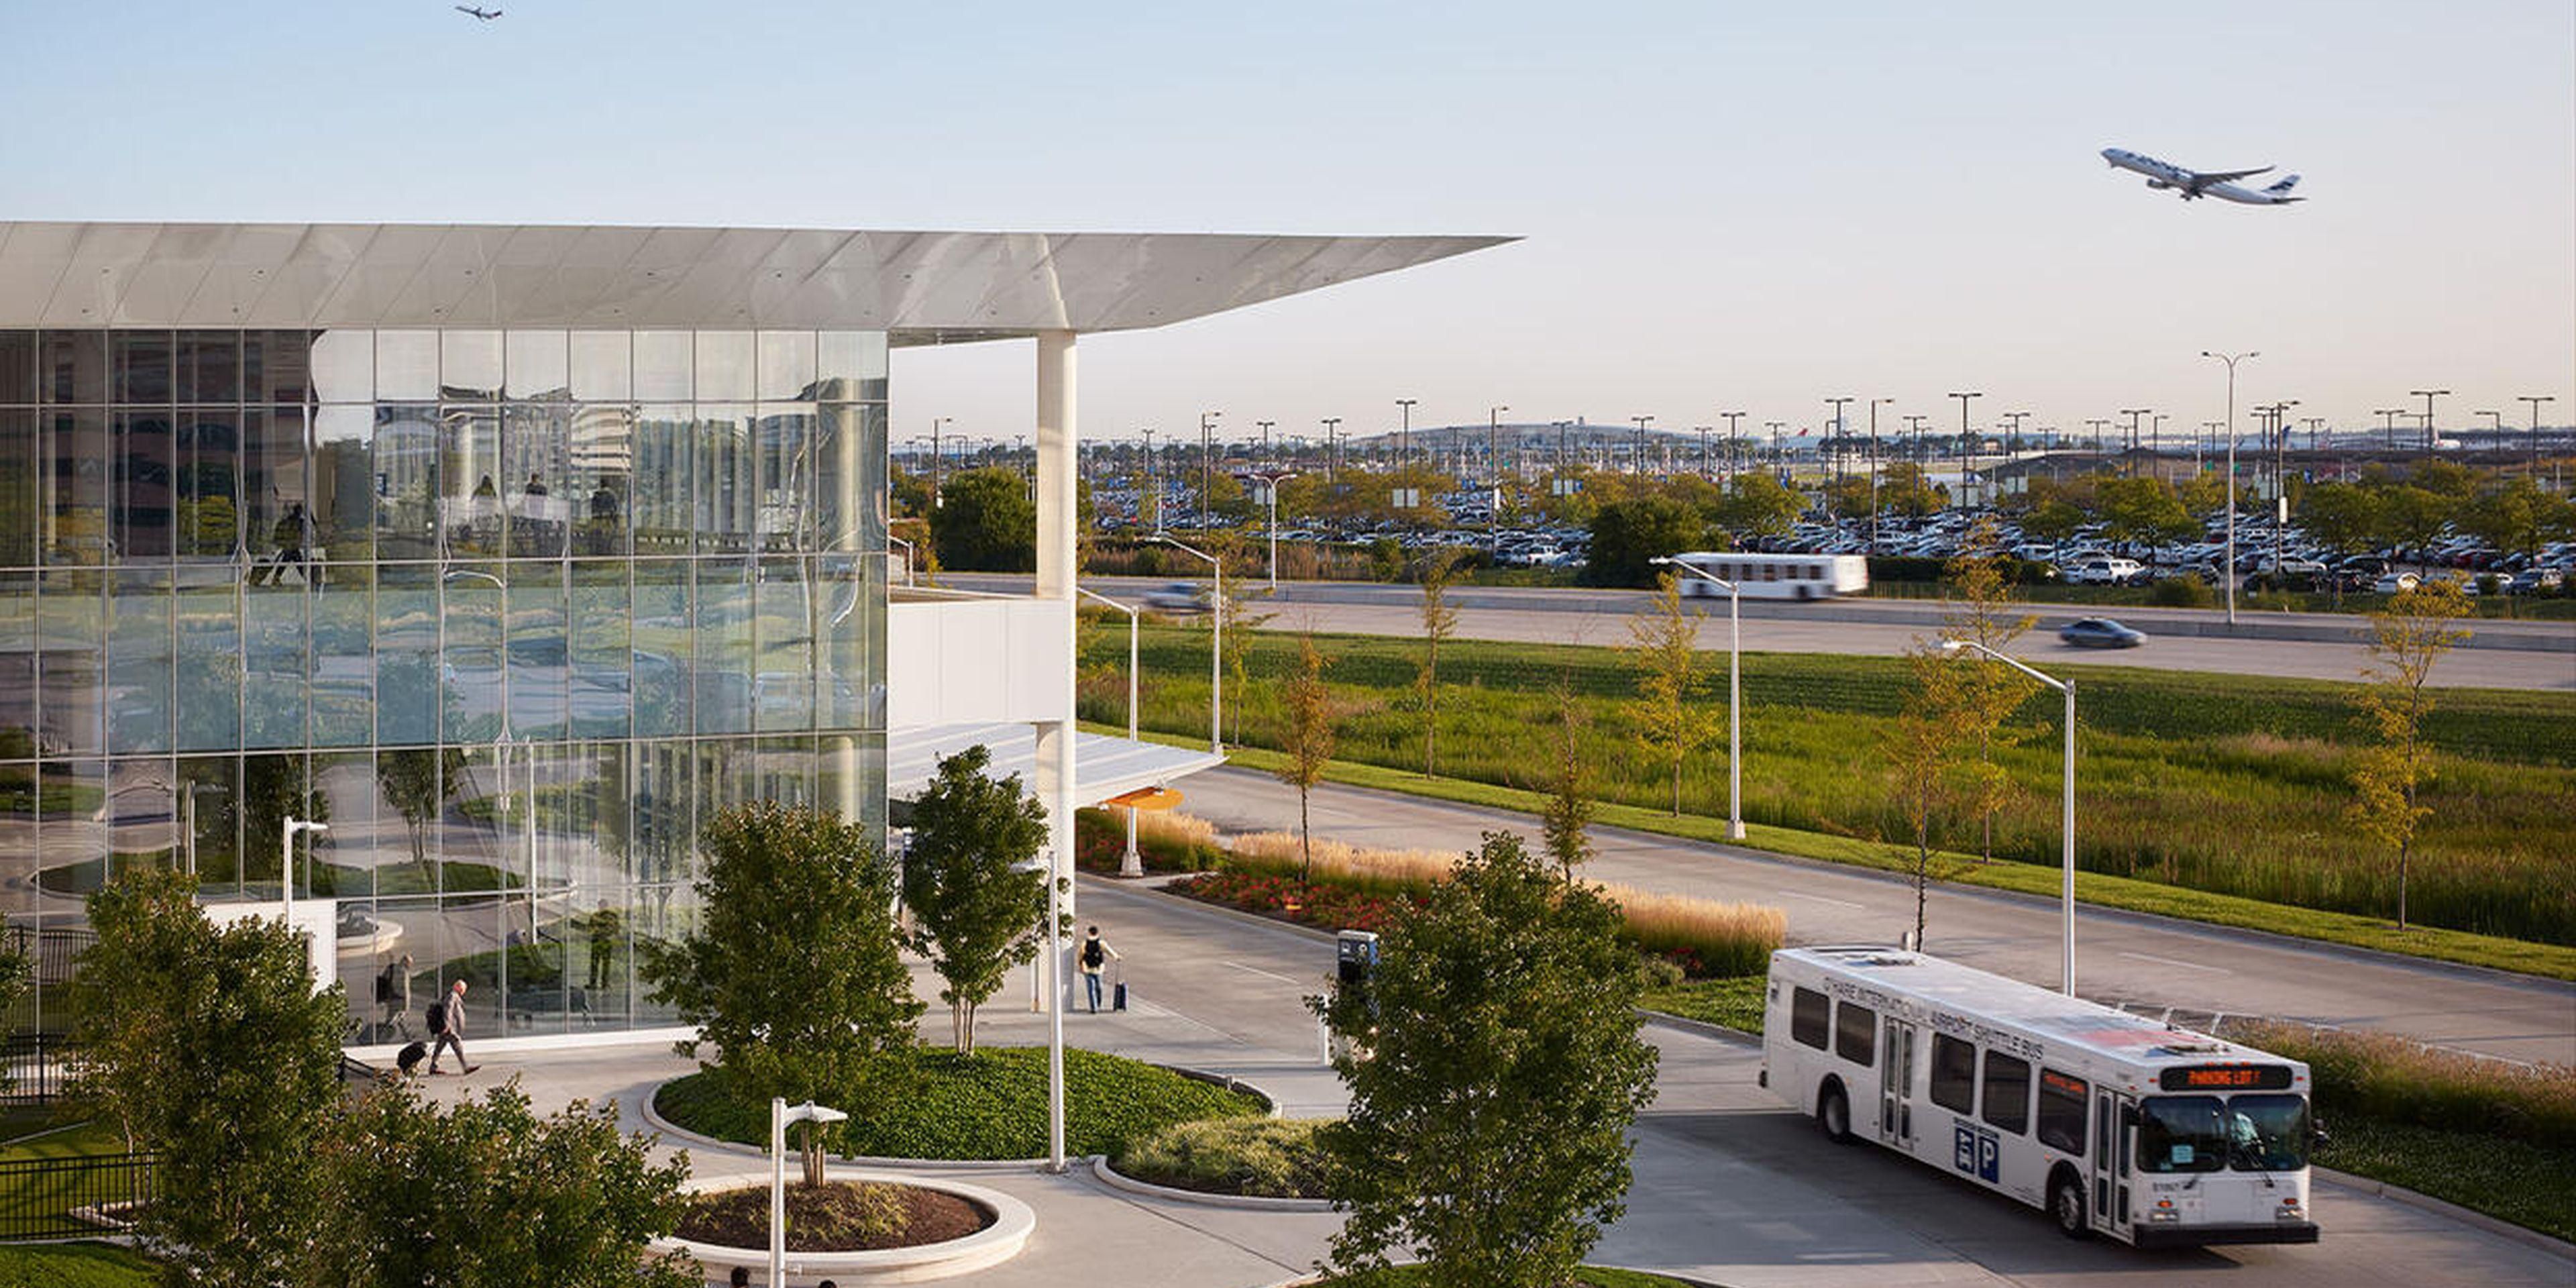 The new ground transportation center (MMF) at O’Hare makes getting a rental car pain free.  Only a half a mile away from the hotel, the car rental facility offers 24-hour shuttles to and from O’Hare every nine mins. Access to 13 major rental car brands leaves your options open!